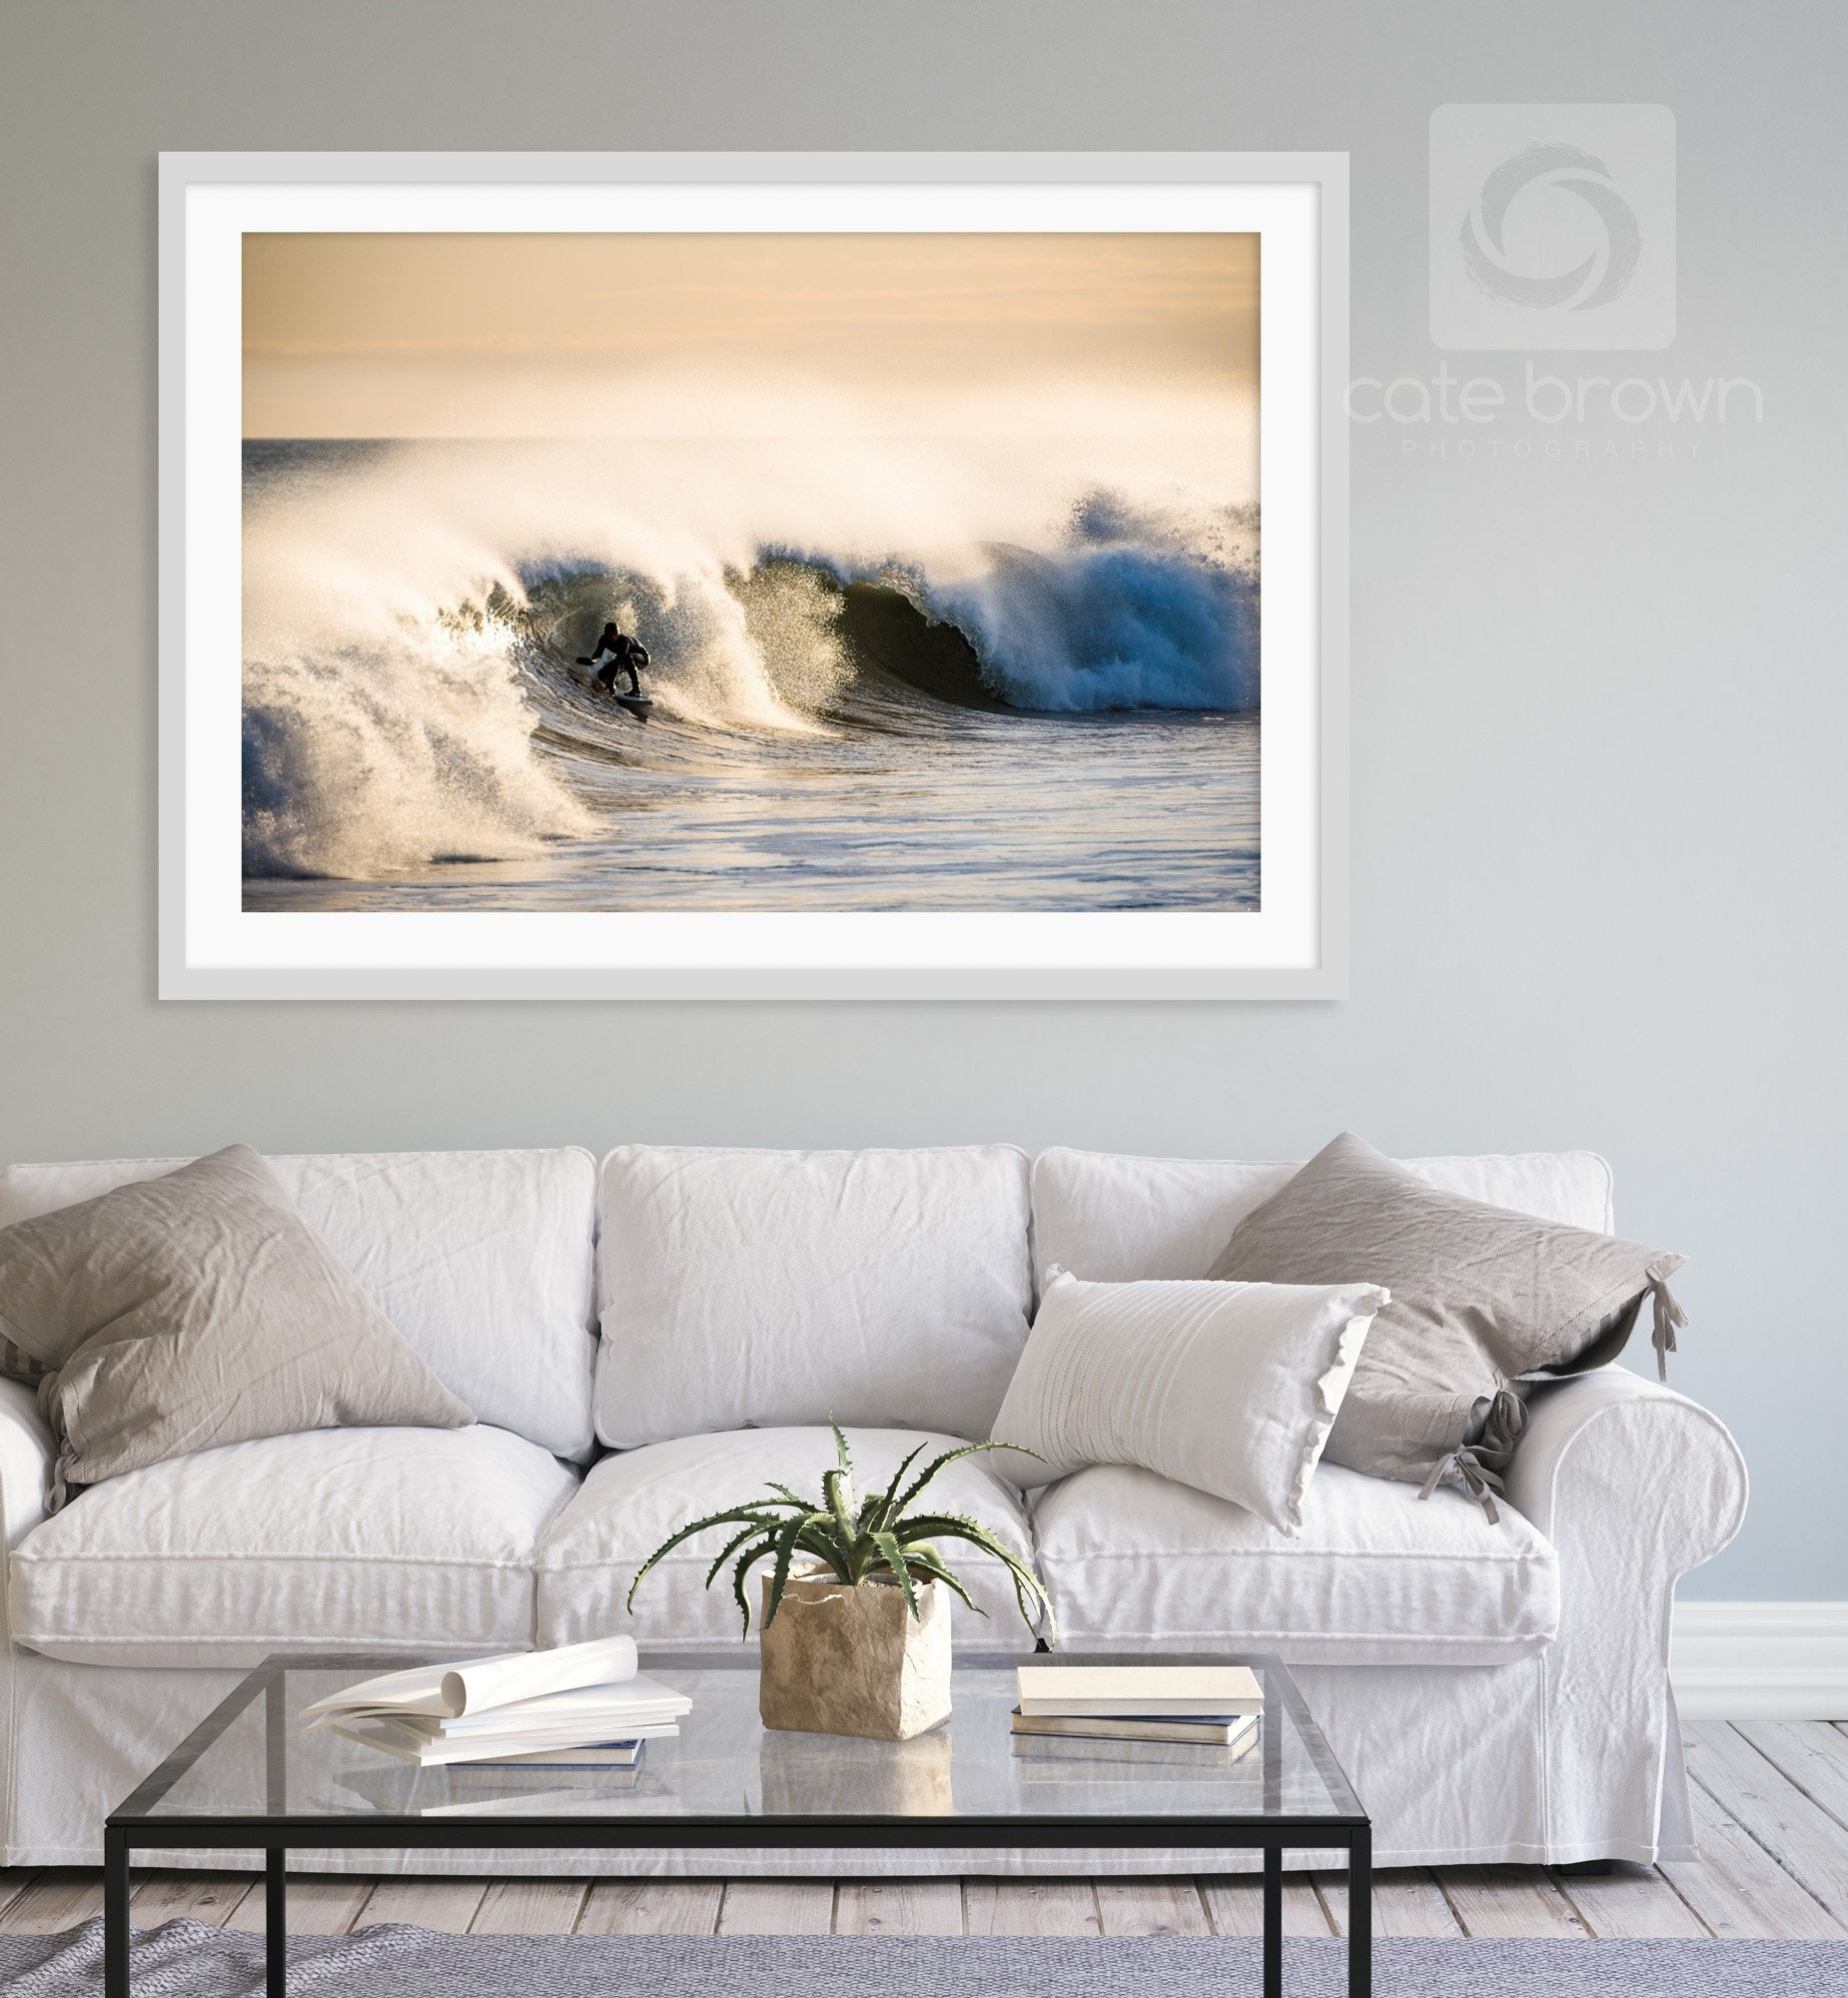 Cate Brown Photo Riley Sunset Surf #1  //  Surf Photography Made to Order Ocean Fine Art